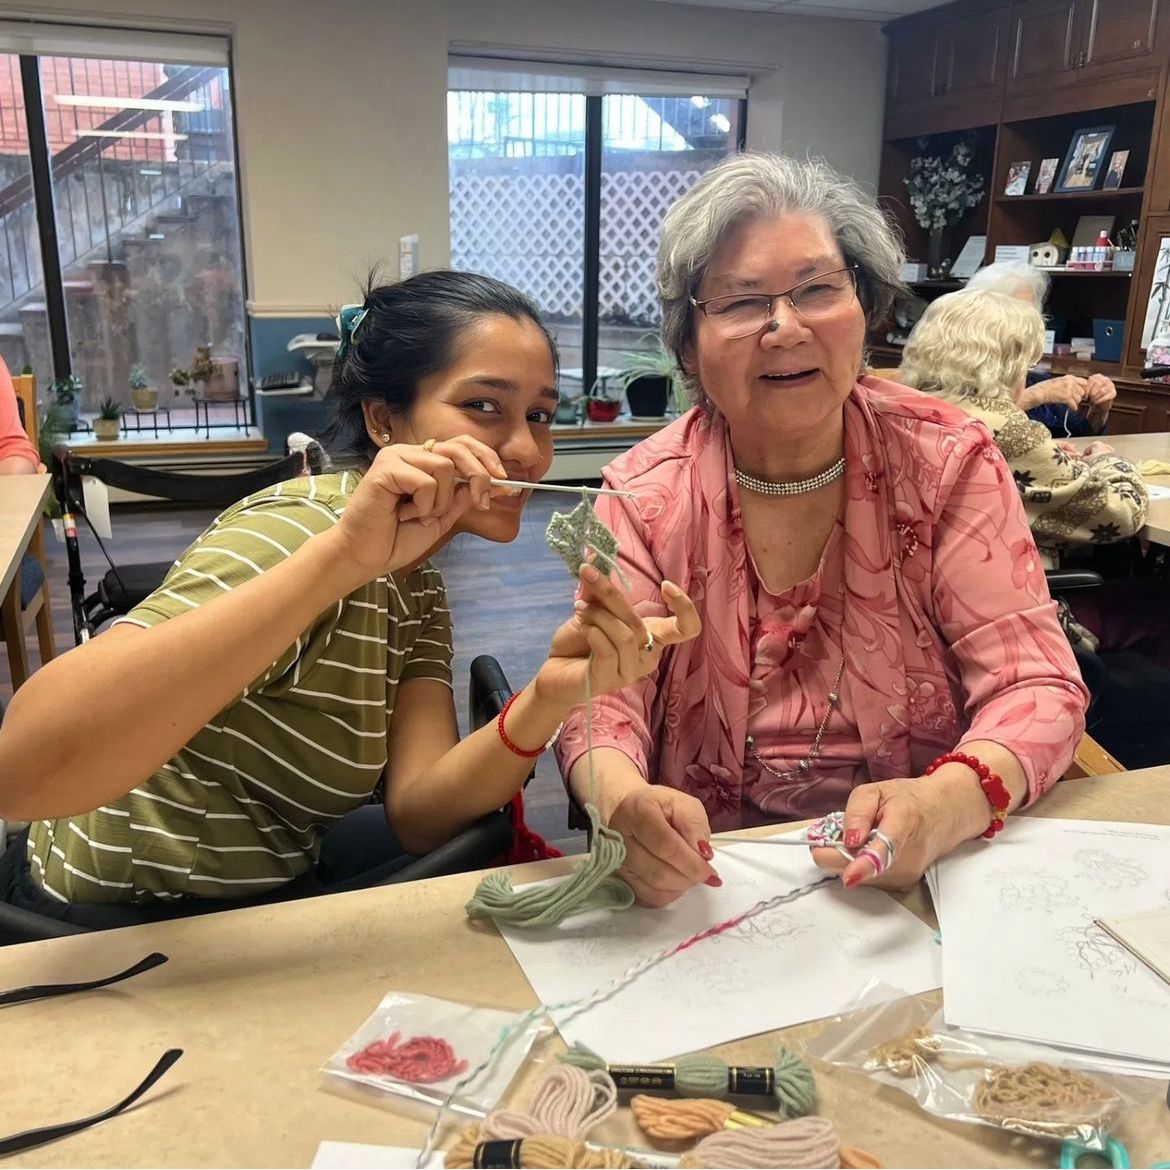 Placement student working with resident on craft program